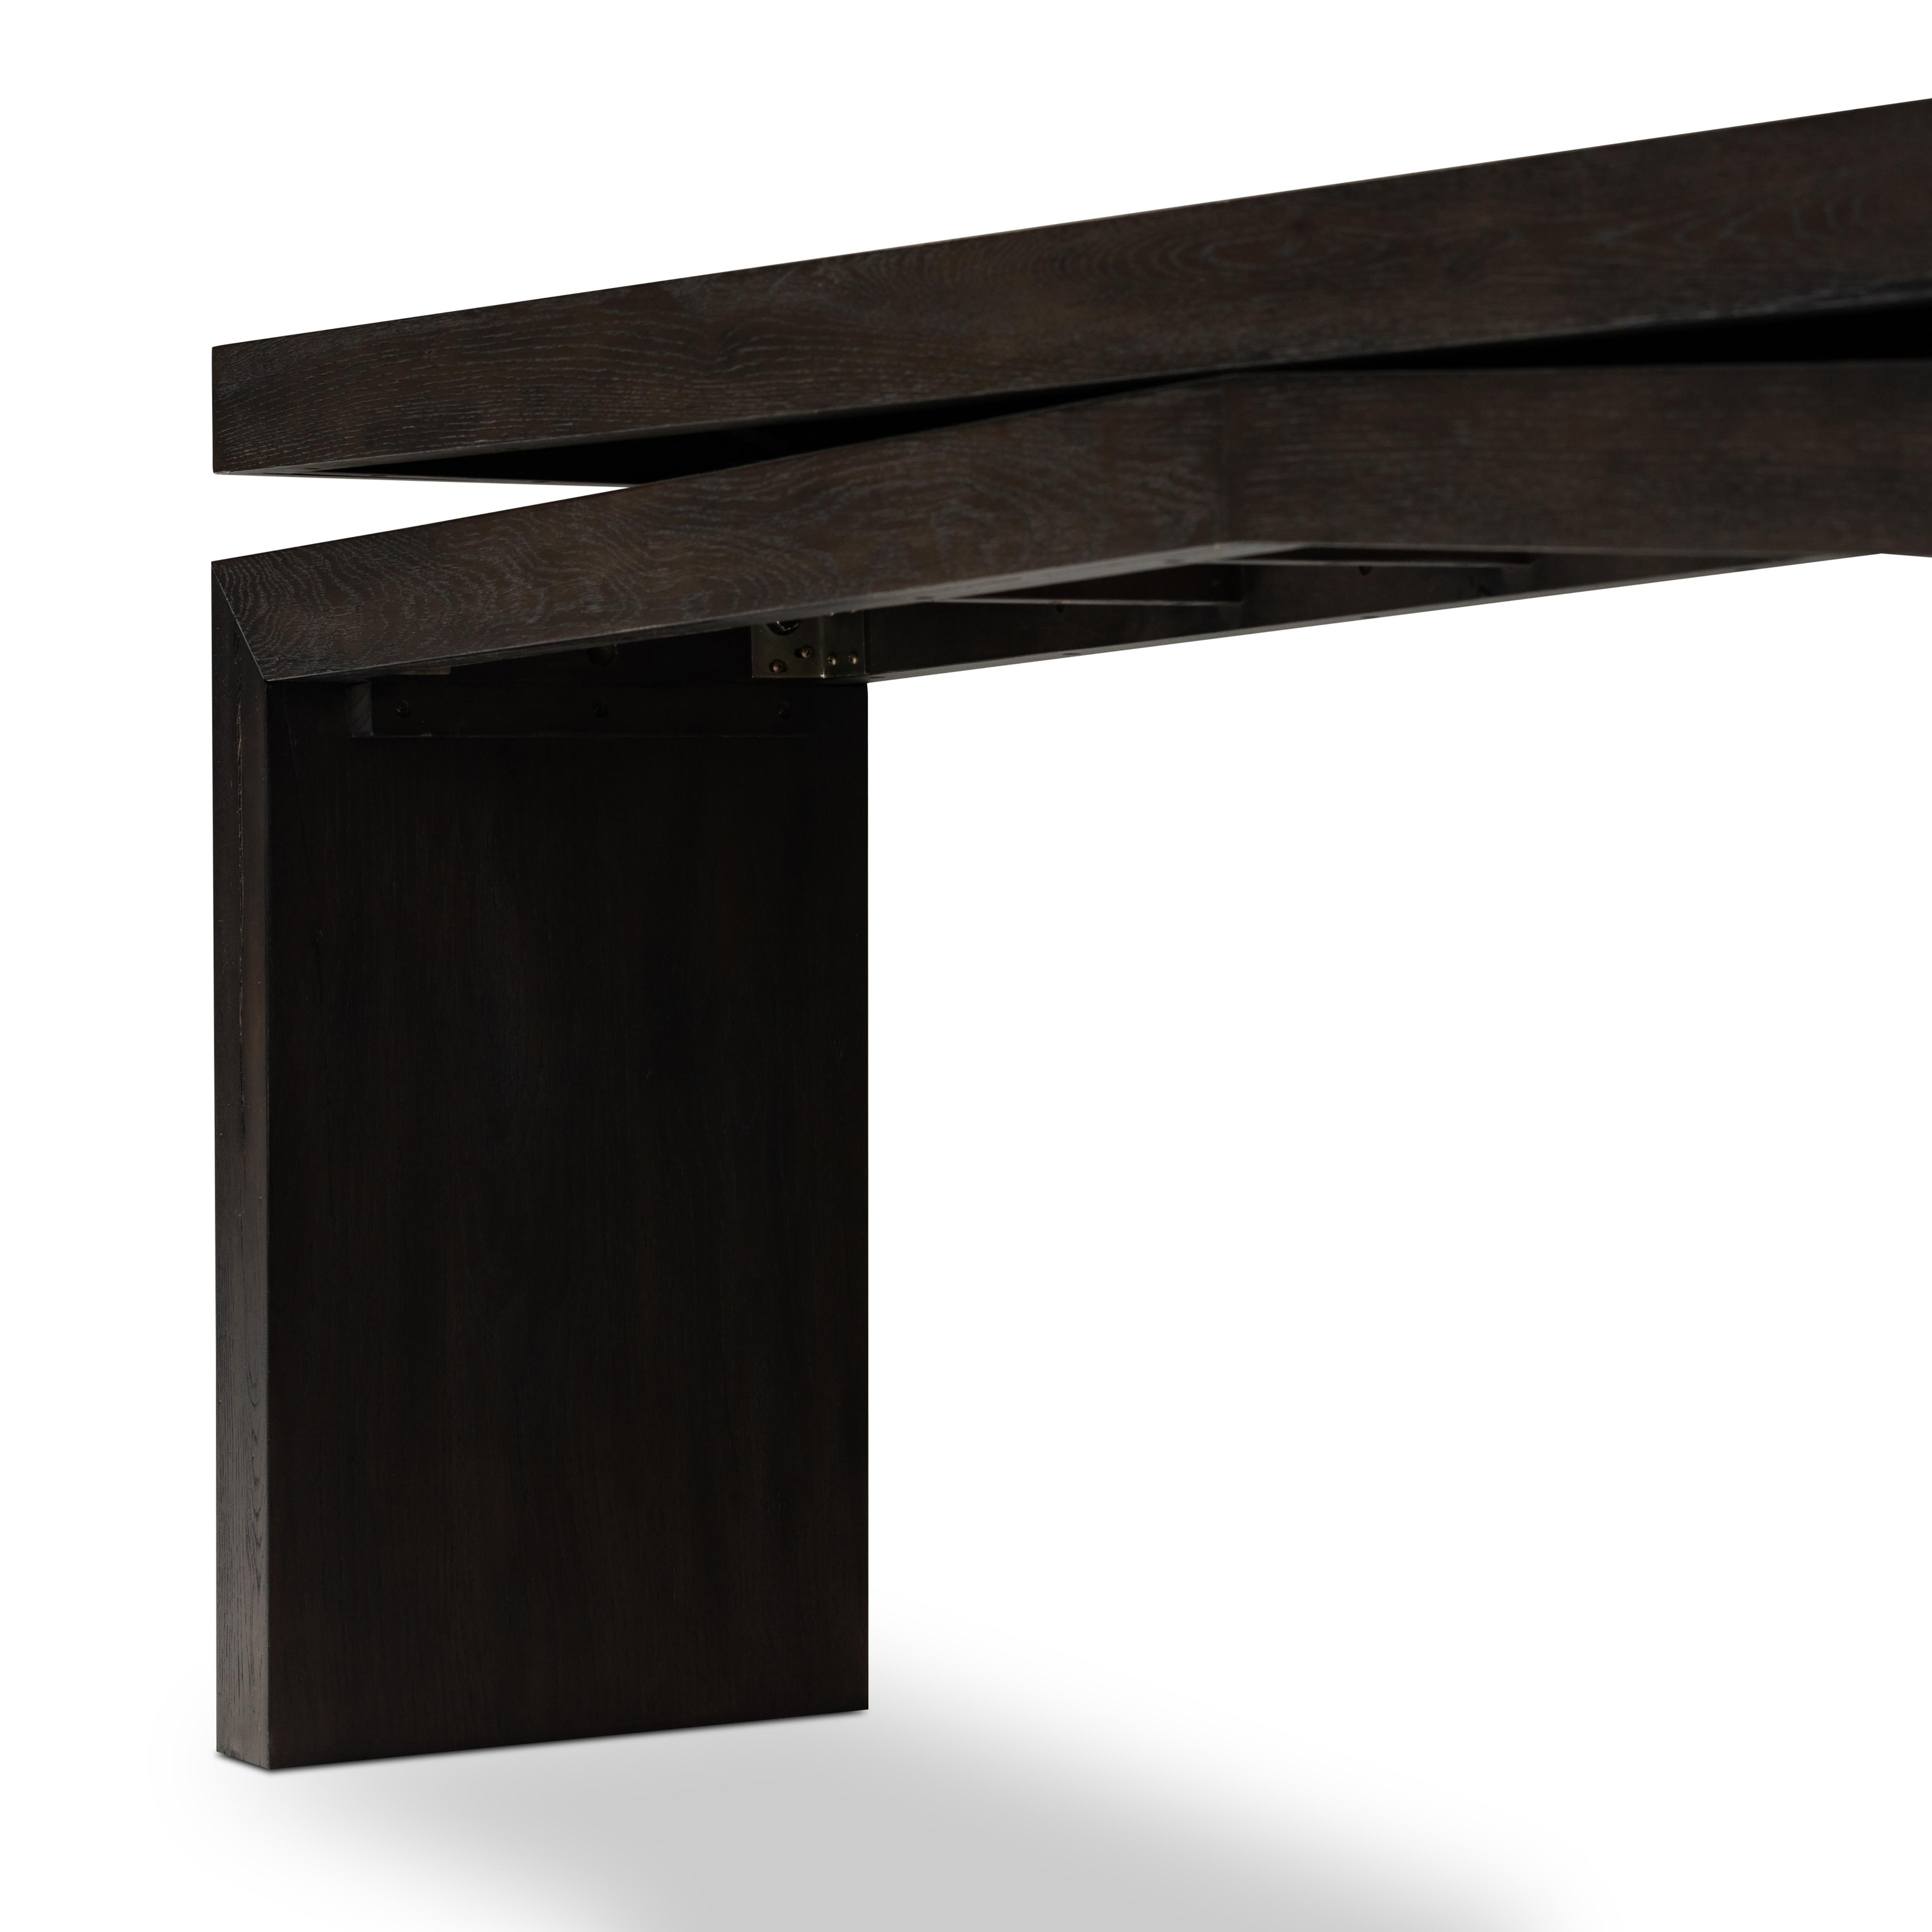 Matthes Console Table-Smoked Black - Image 8